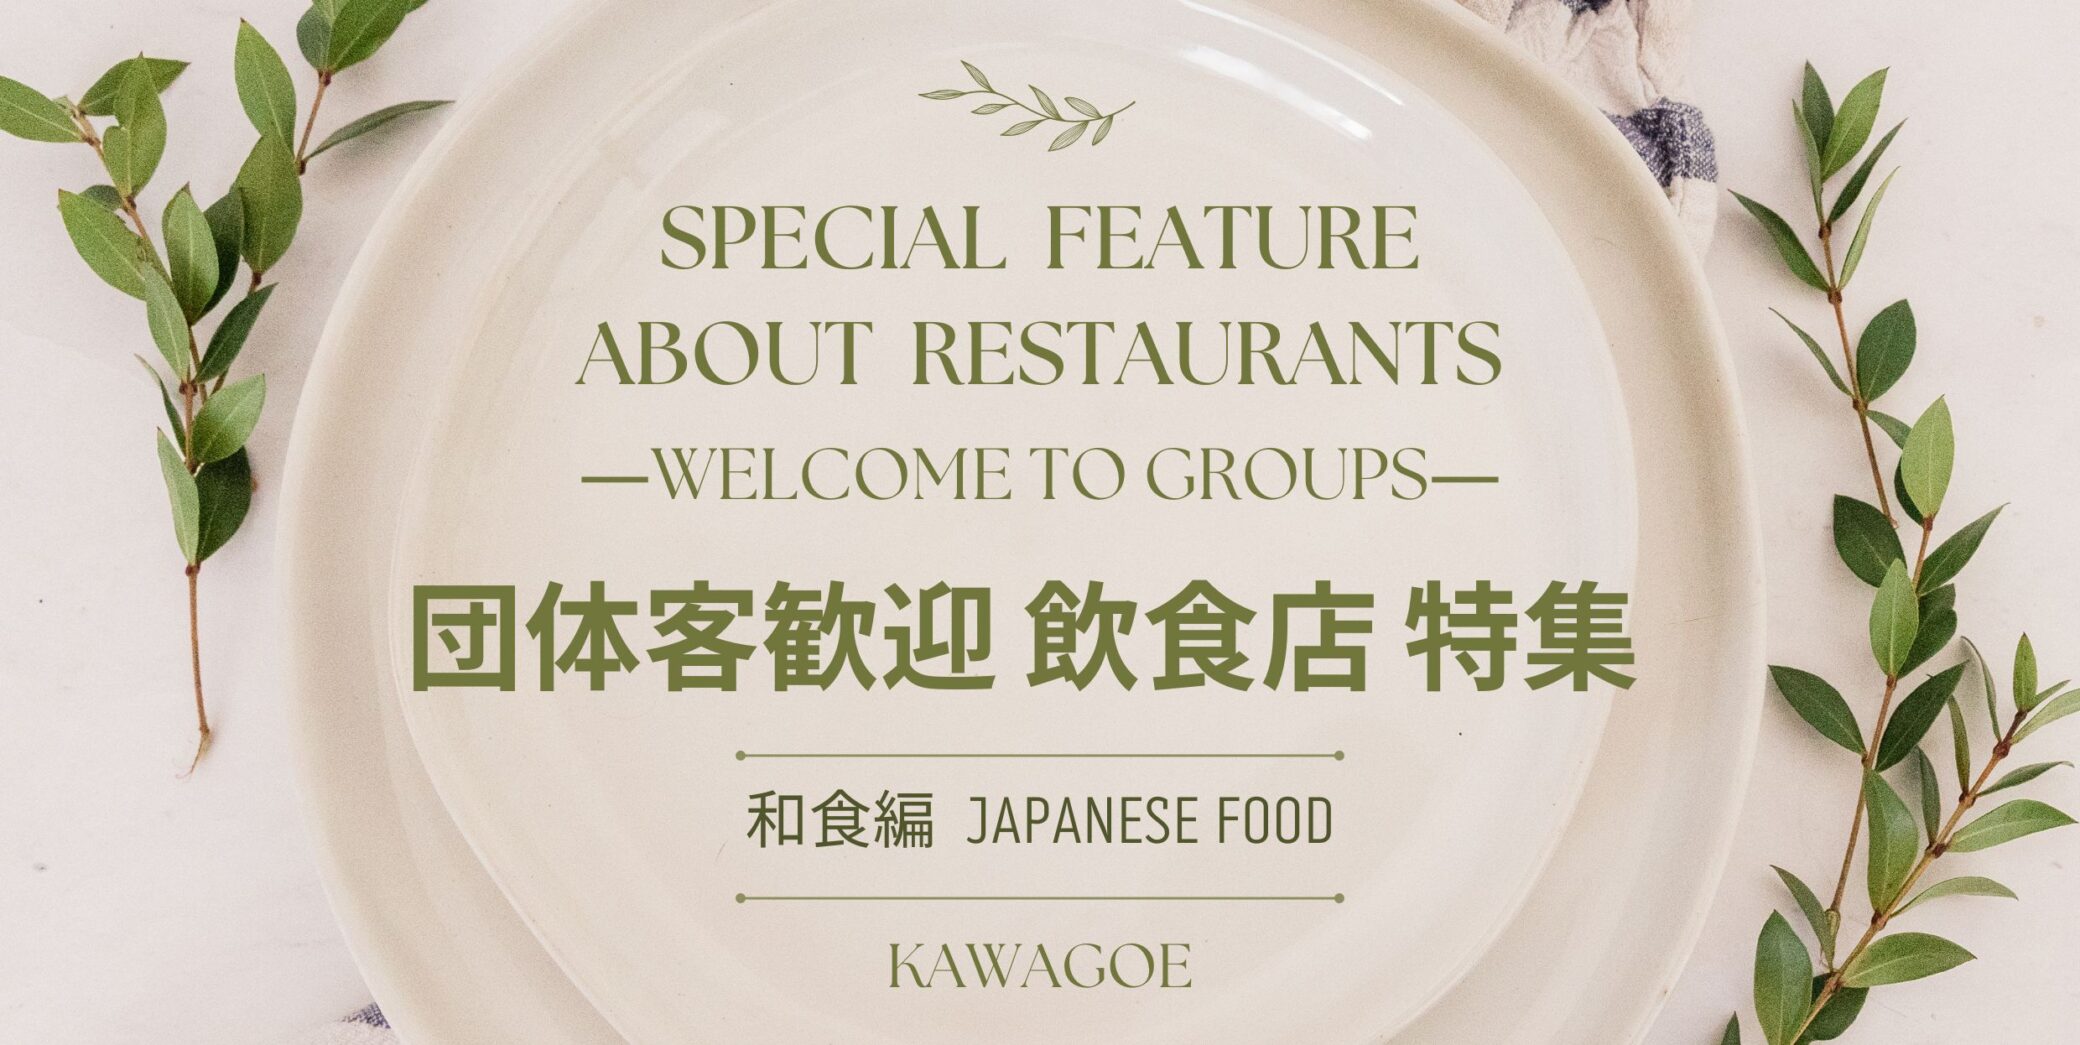 🍴Special feature on restaurants welcoming group guests-Japanese cuisine-🎉